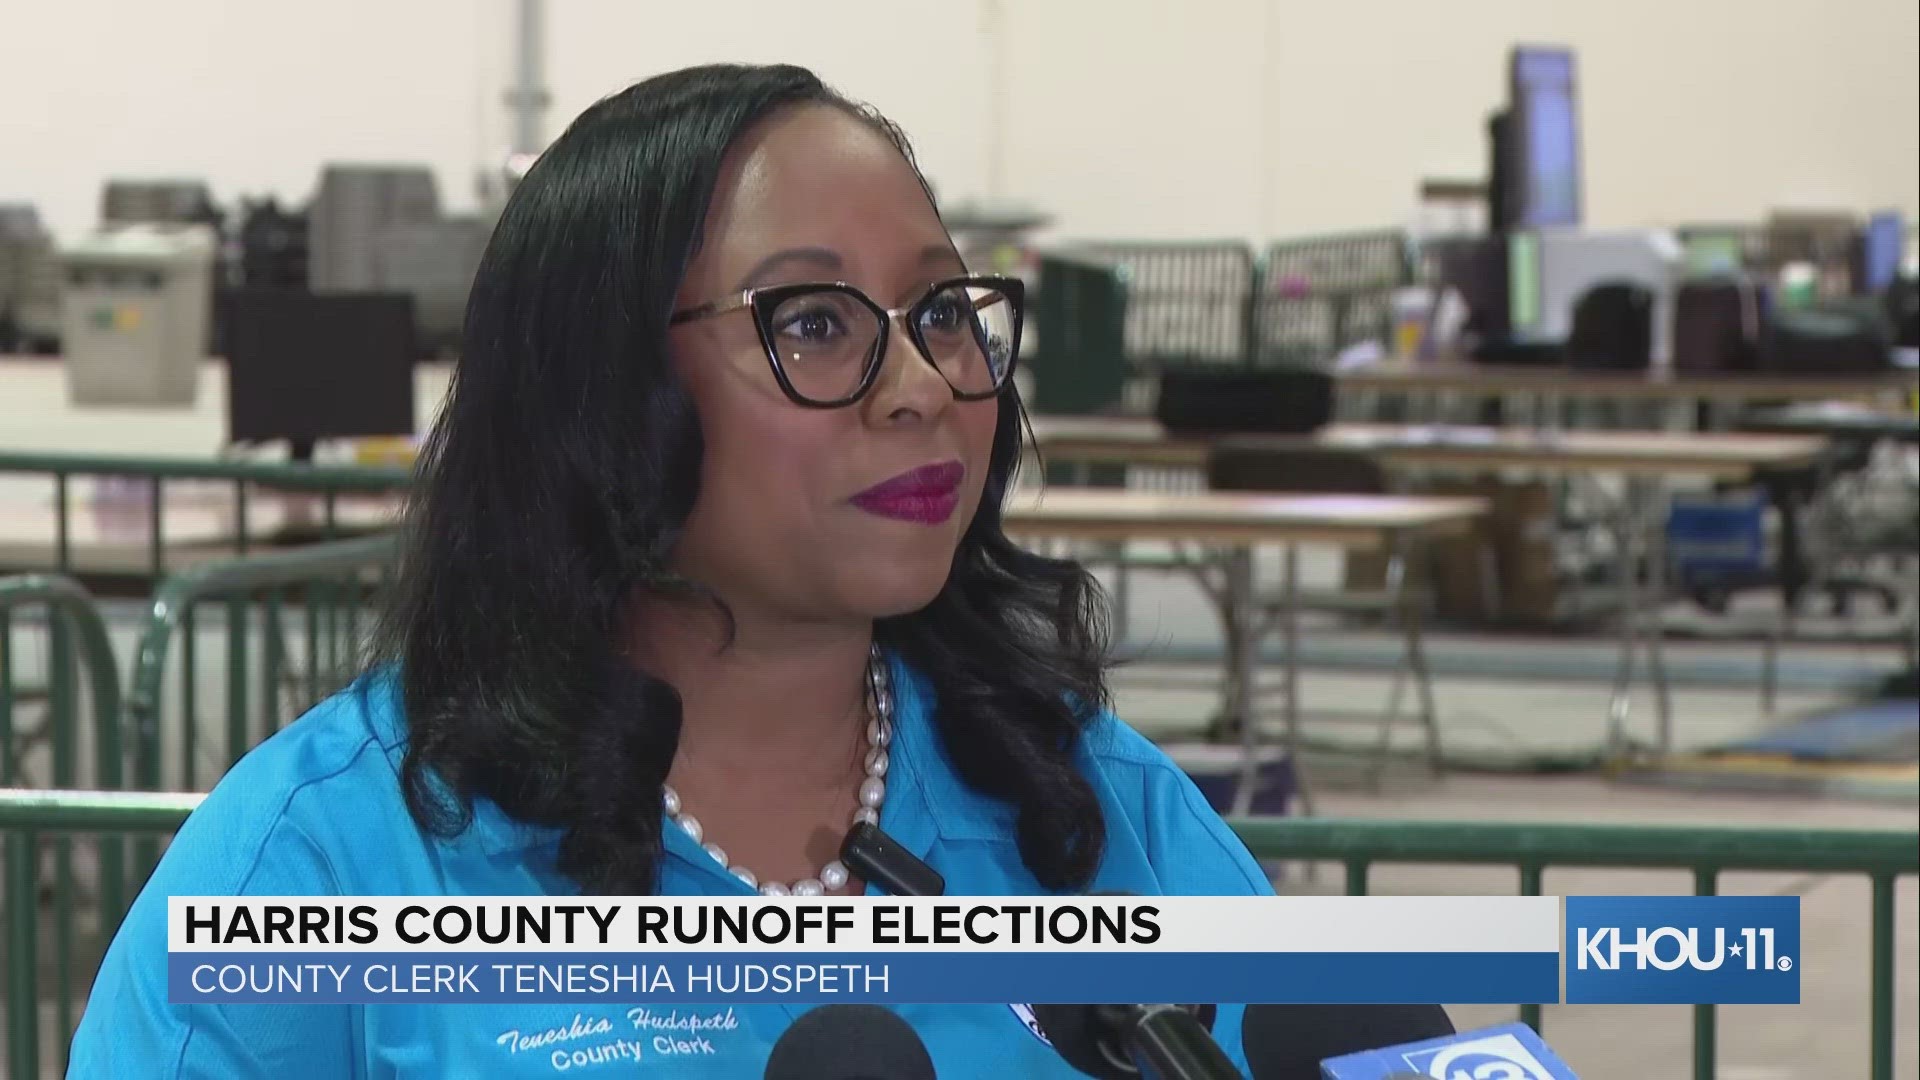 The runoff election will determine who replaces outgoing Mayor Sylvester Turner, who the next city controller will be and seven city council positions.